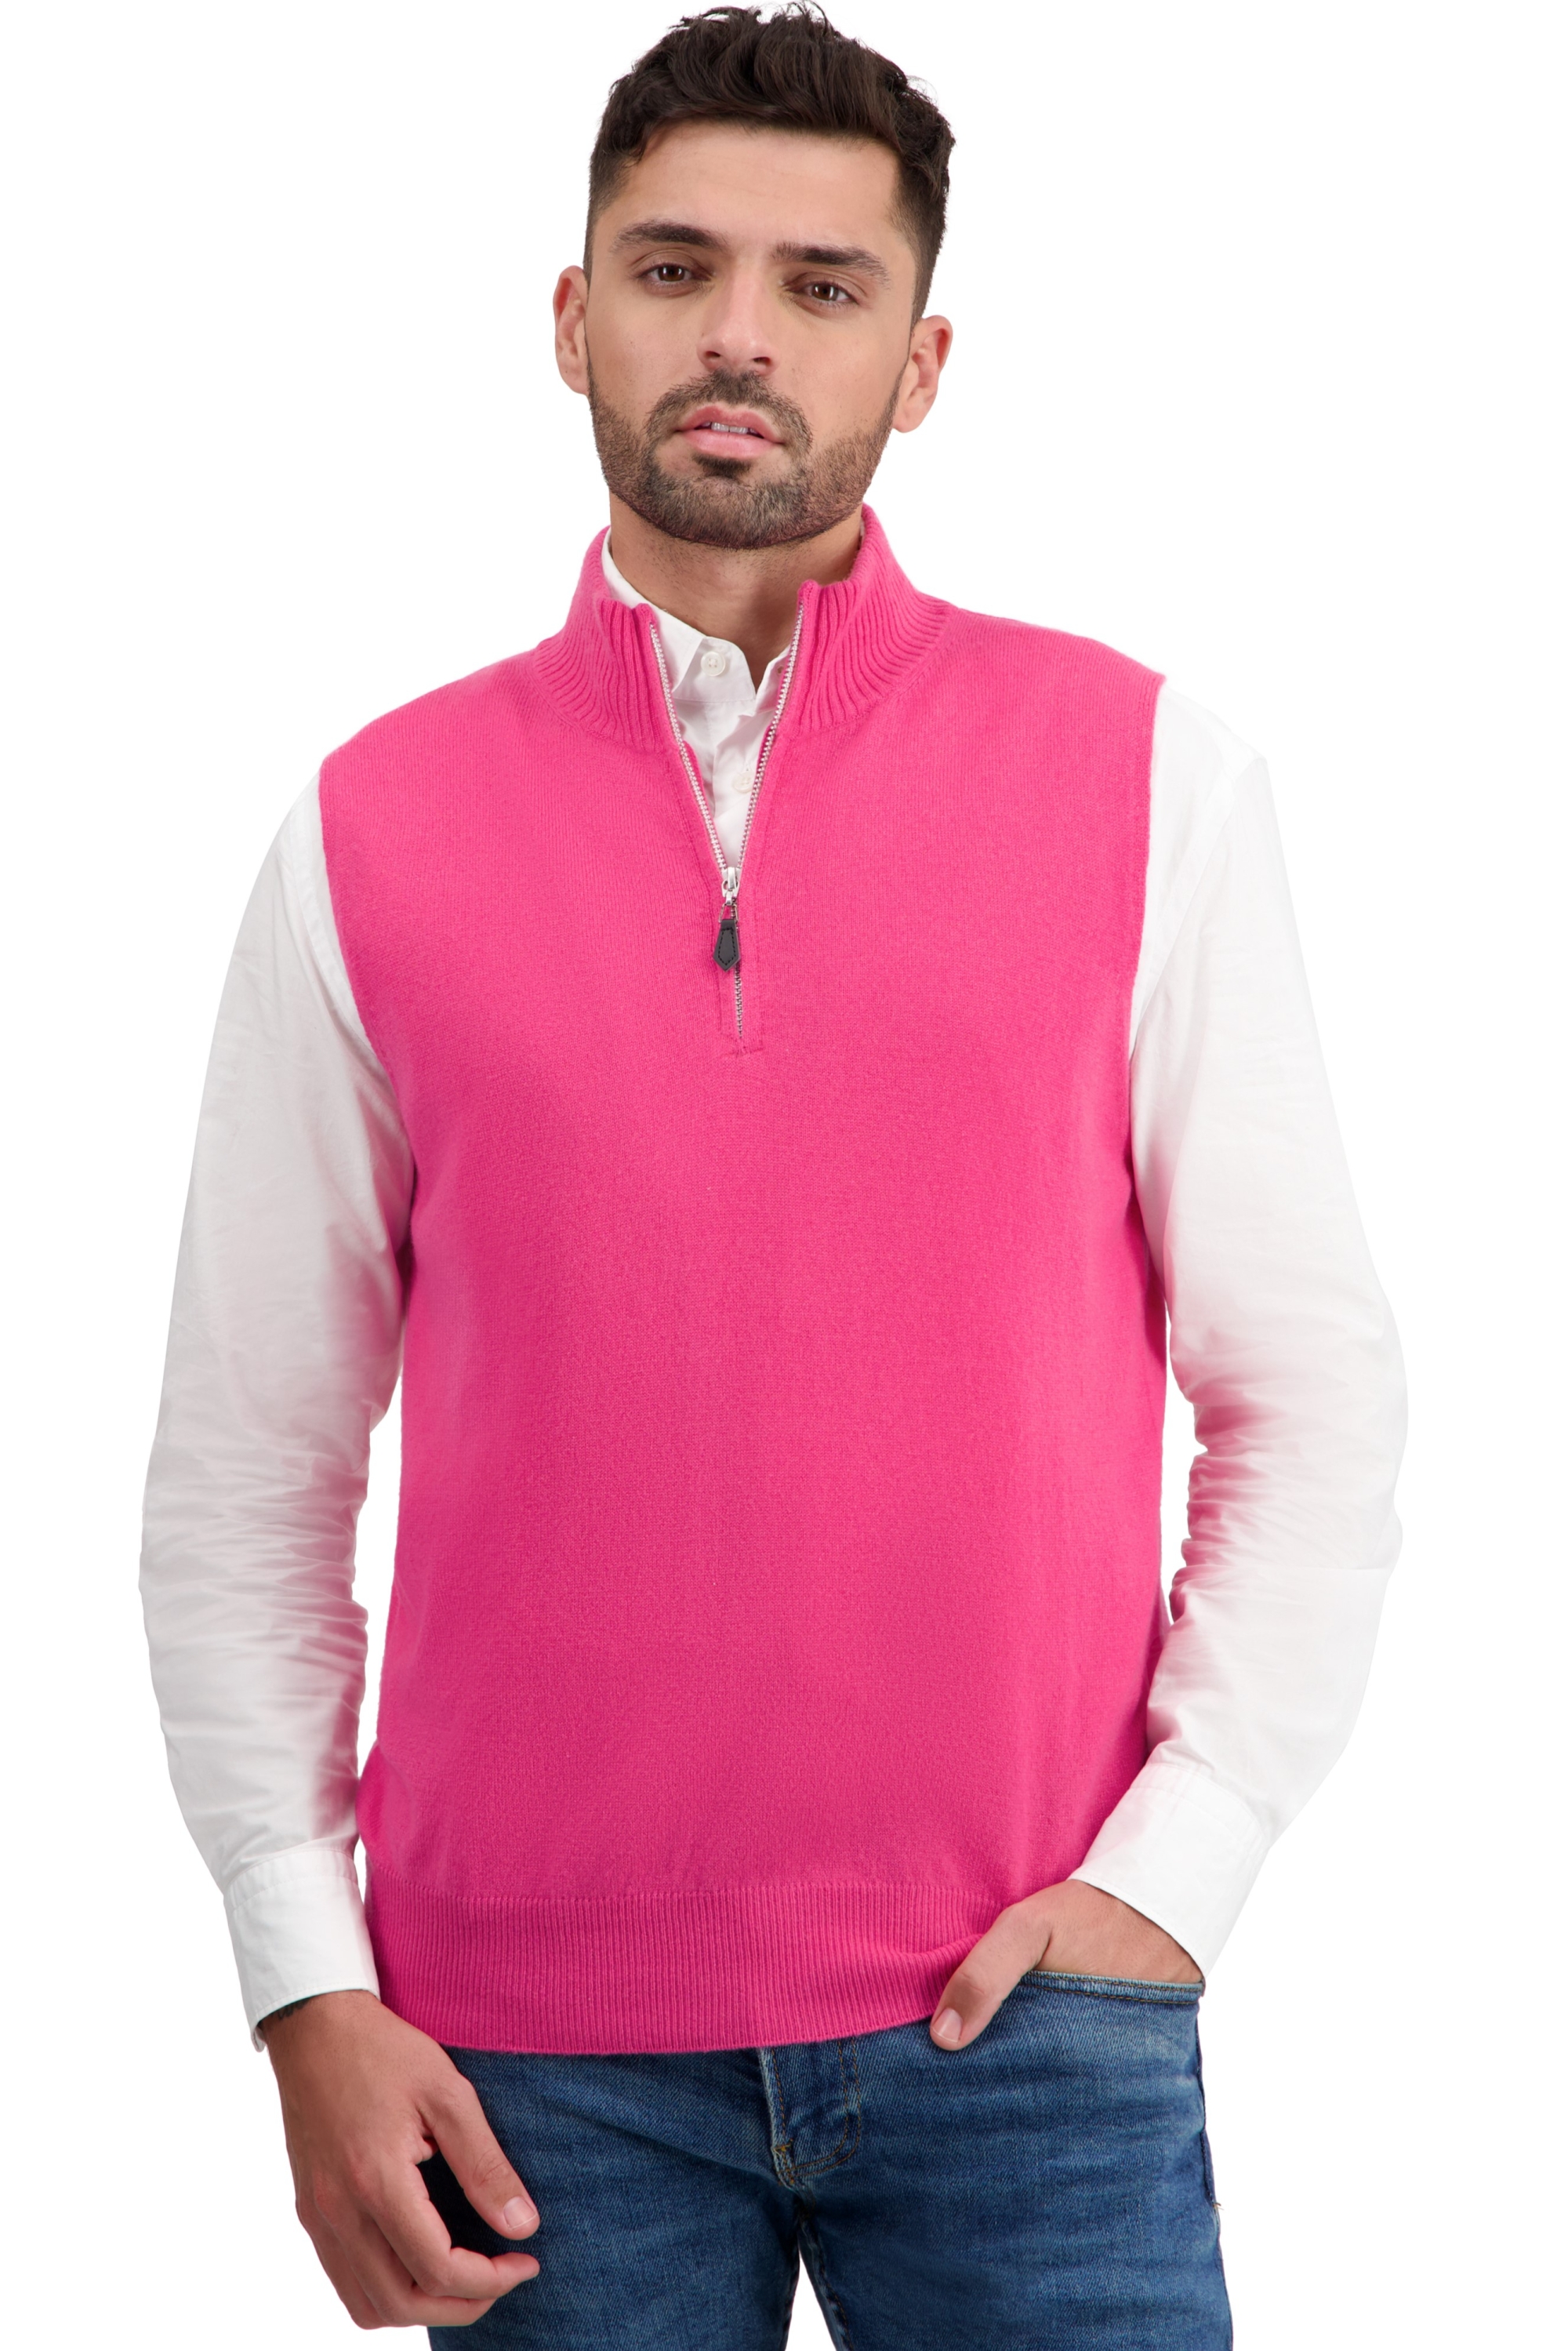 Cachemire polo camionneur homme texas rose shocking xs